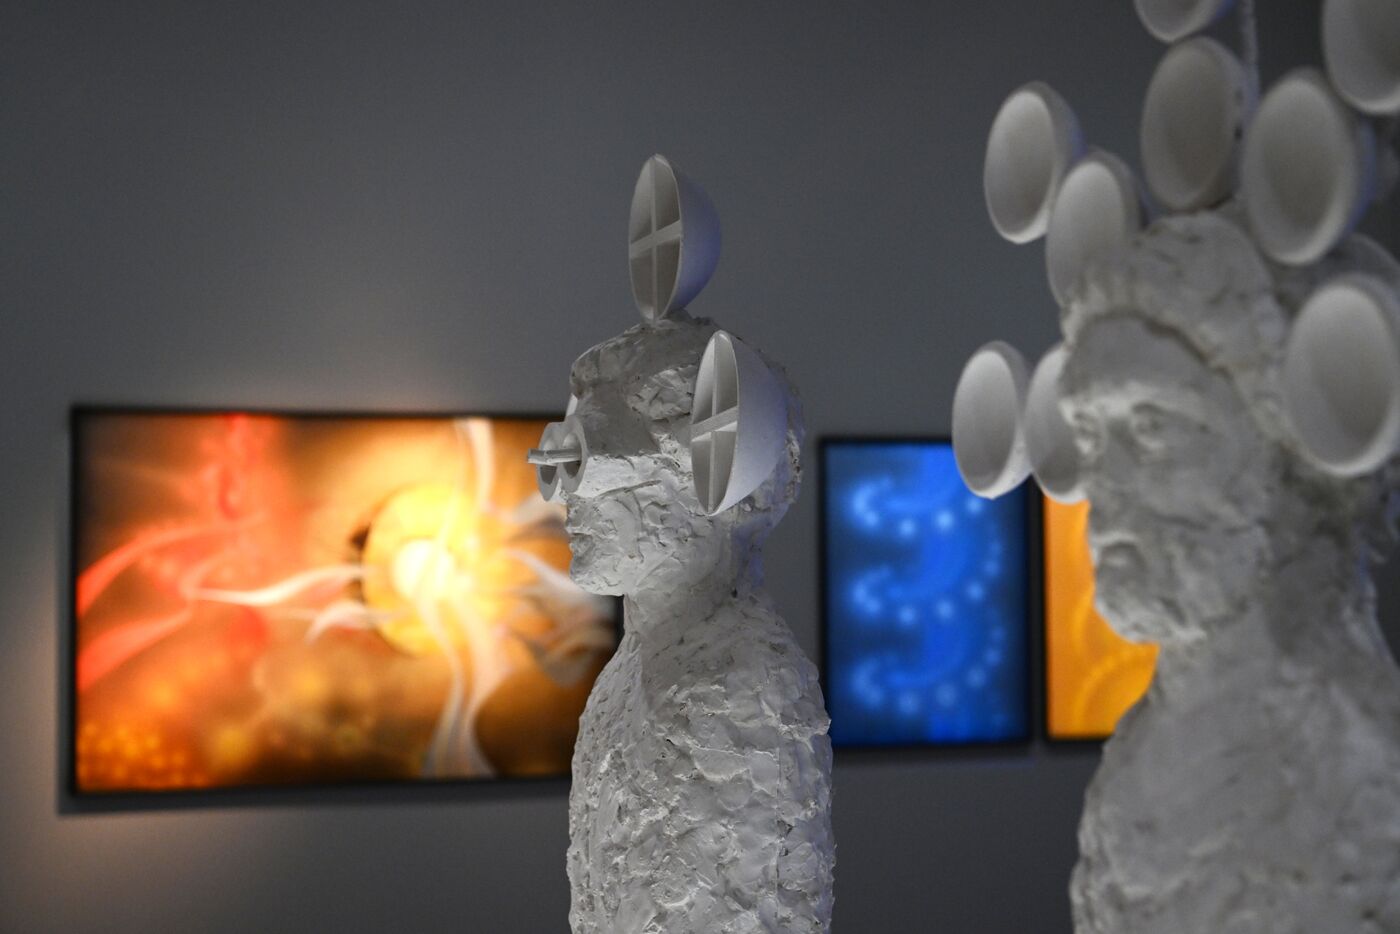 SPIEF-2023. Parallel Universes. From Abstraction to Artefact. The Collection of Natalia Opaleva